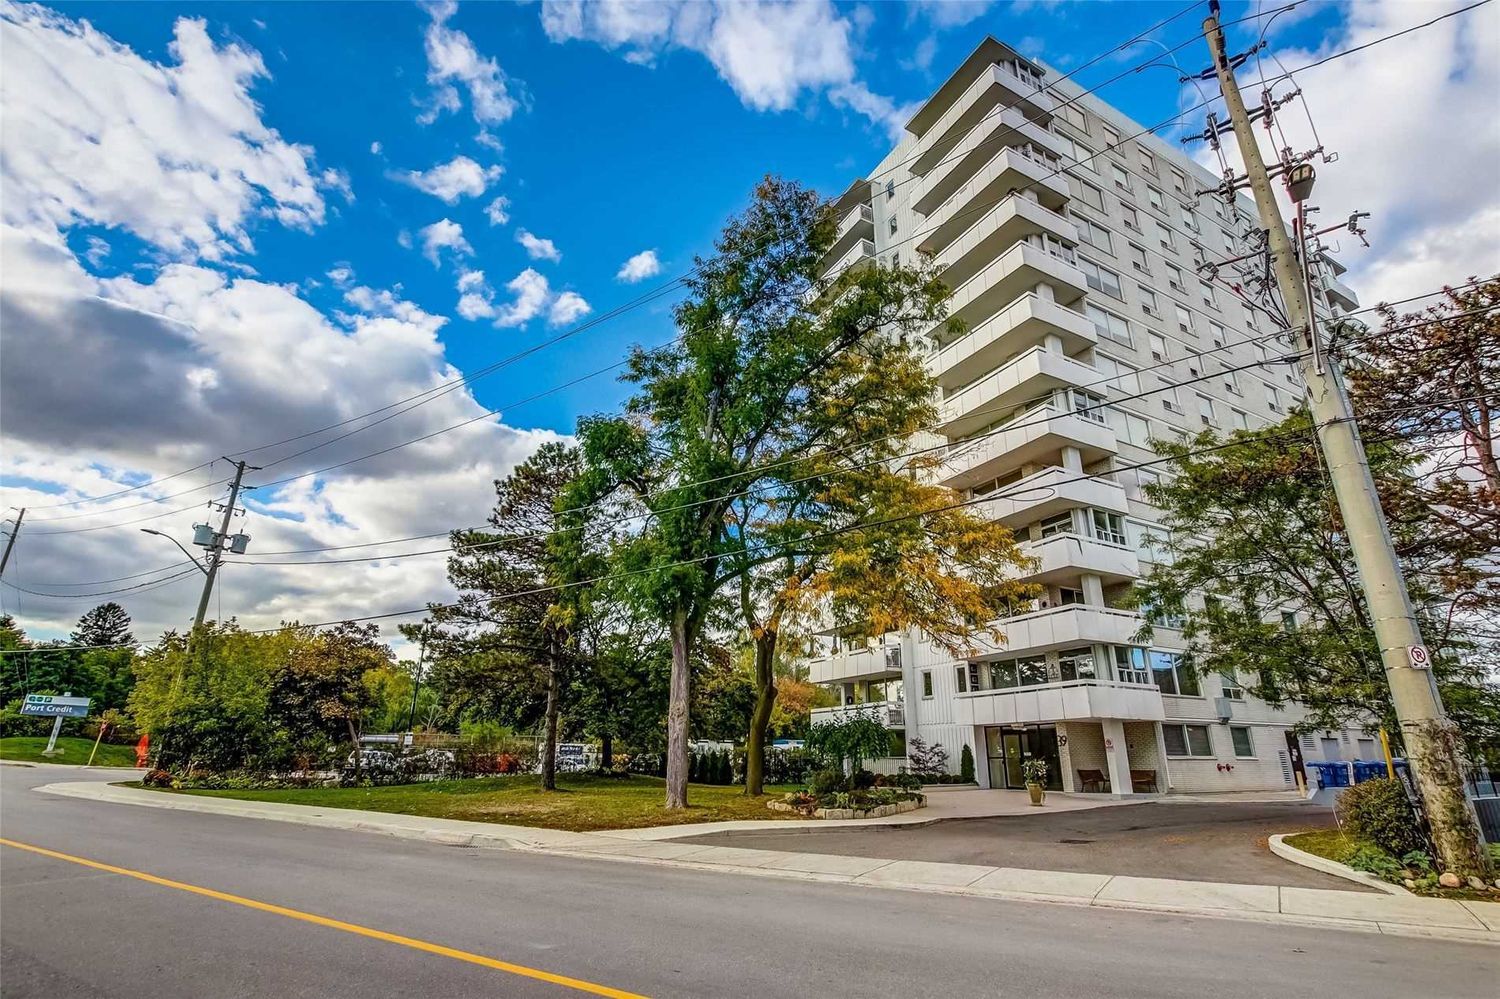 39 Stavebank Road N. 39 Stavebank Condos is located in  Mississauga, Toronto - image #1 of 2